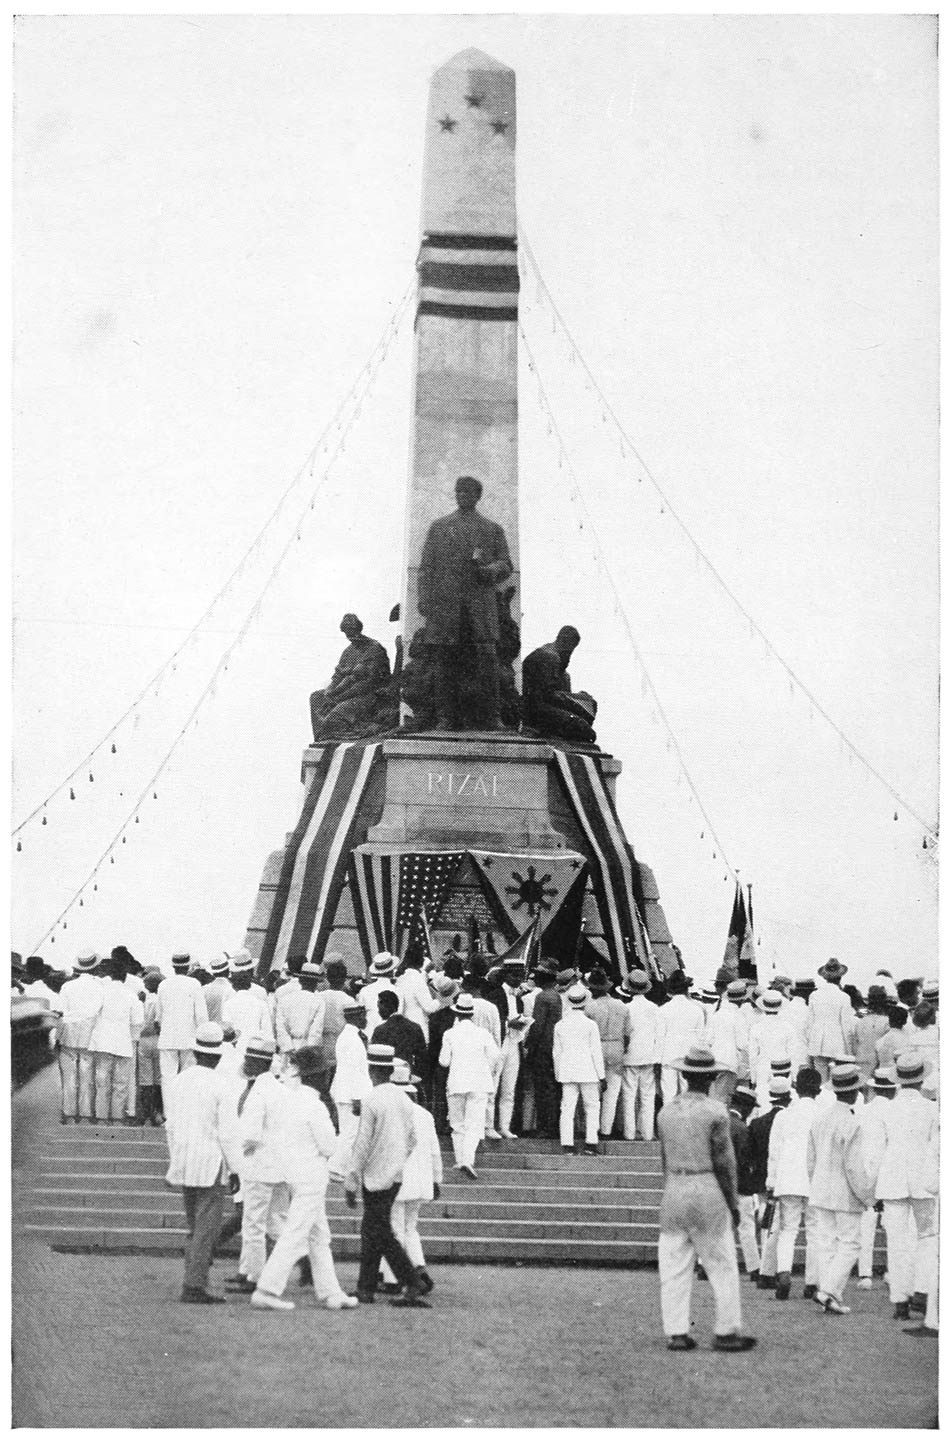 THE RIZAL MONUMENT AT THE LUNETA DECORATED FOR RIZAL DAY, DECEMBER 30